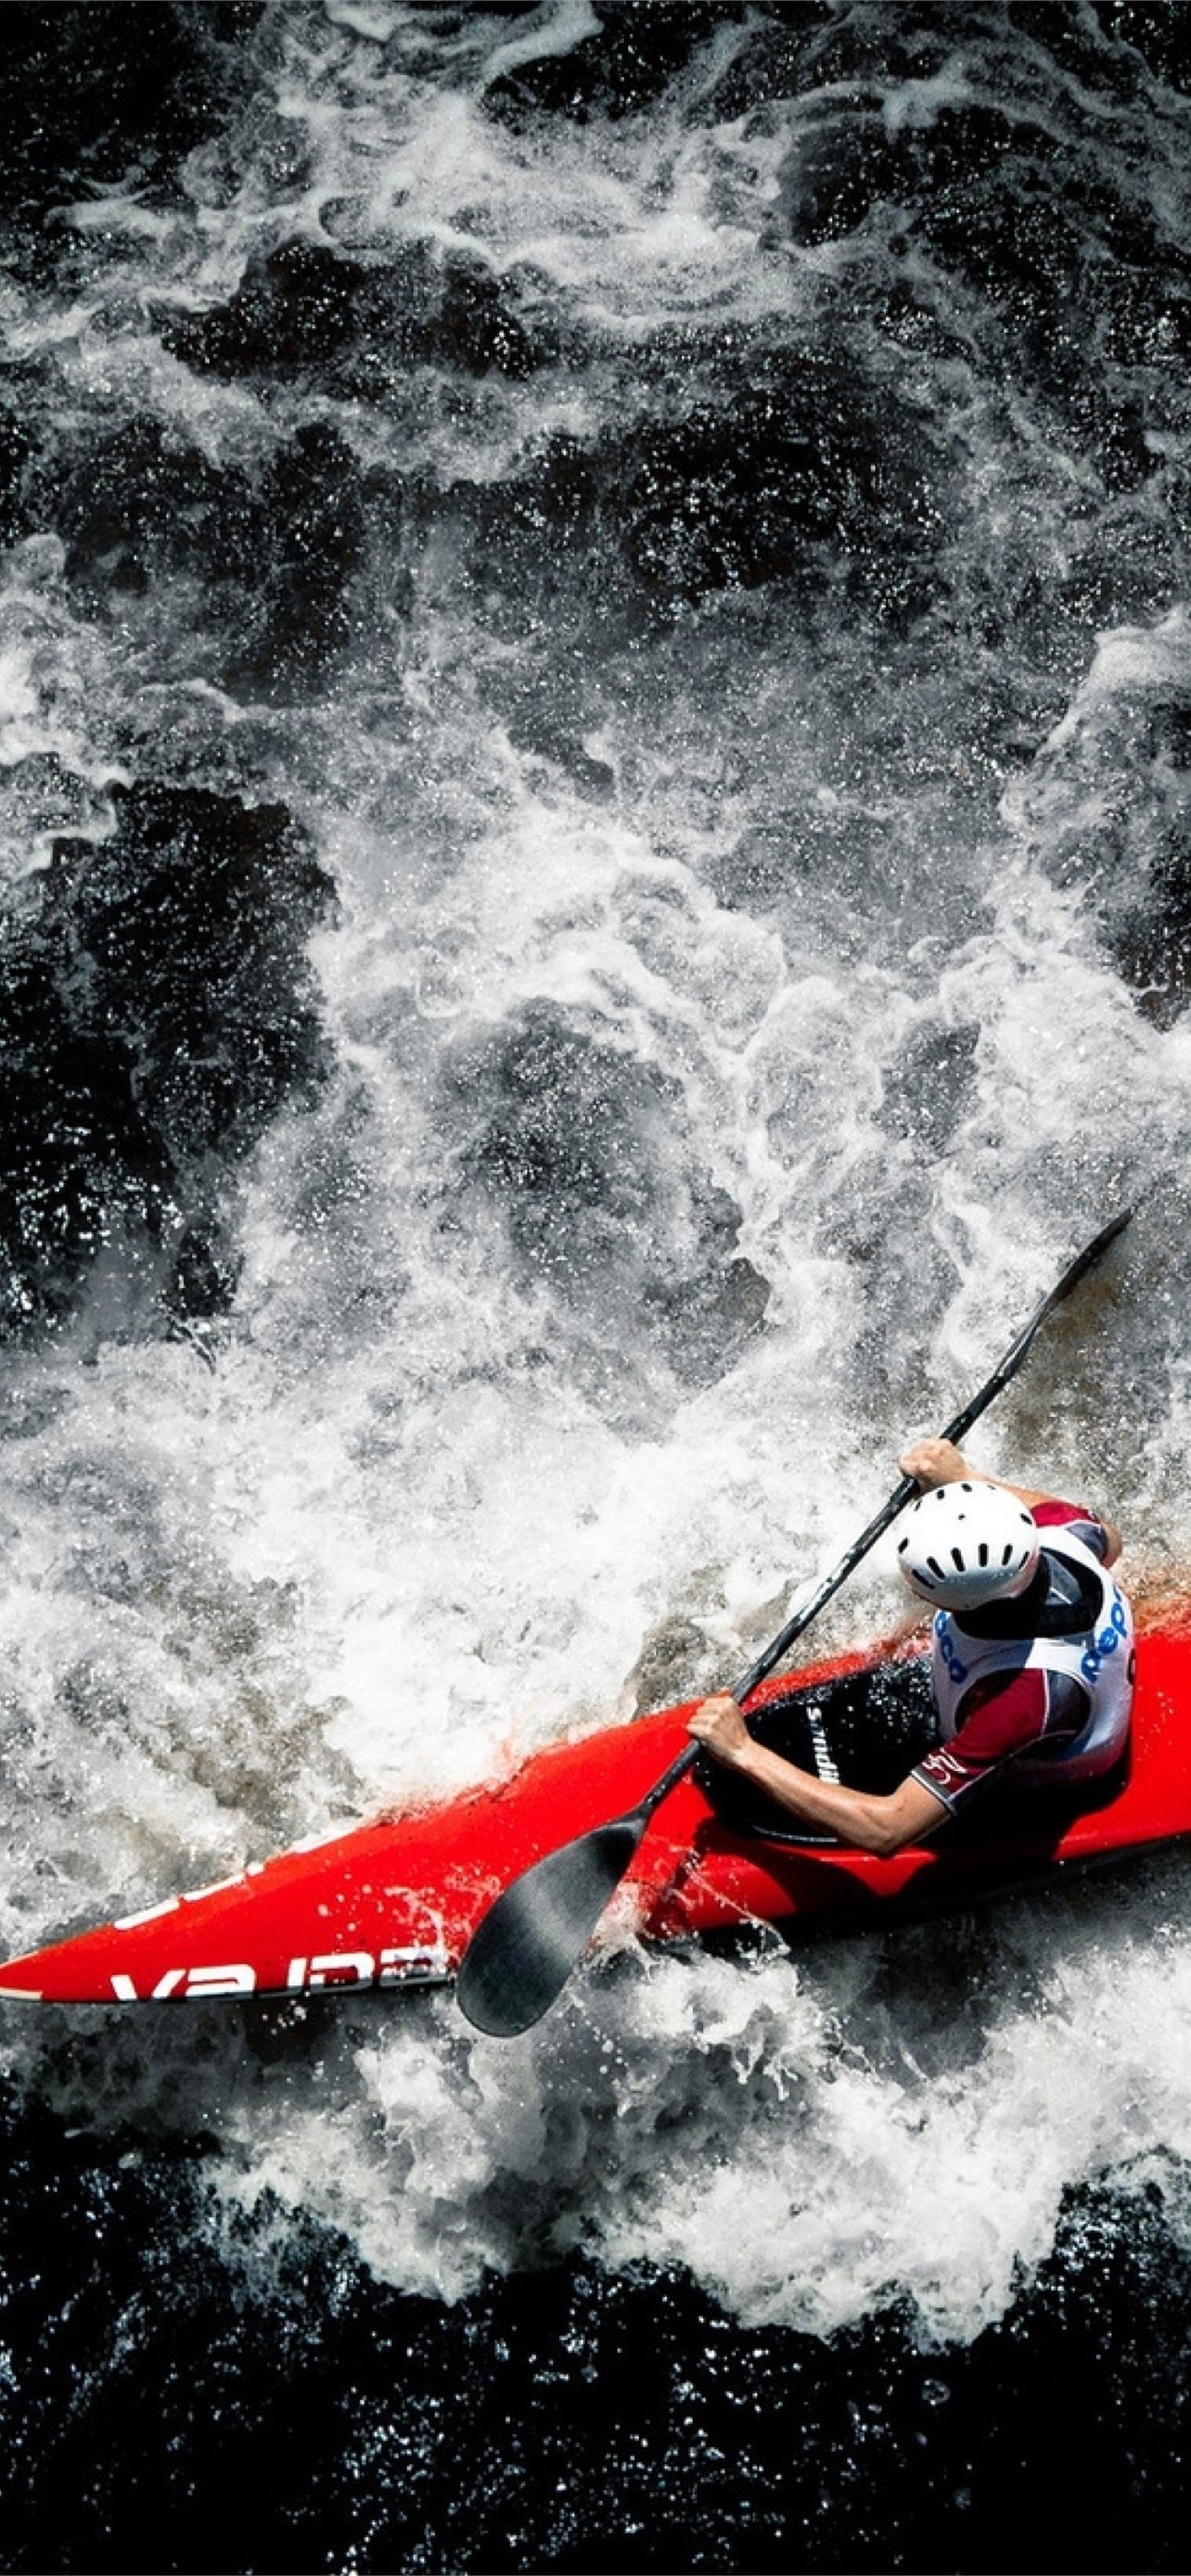 Rowing: Whitewater kayaking, An extreme boating discipline that is popular among adrenaline lovers. 1290x2780 HD Wallpaper.